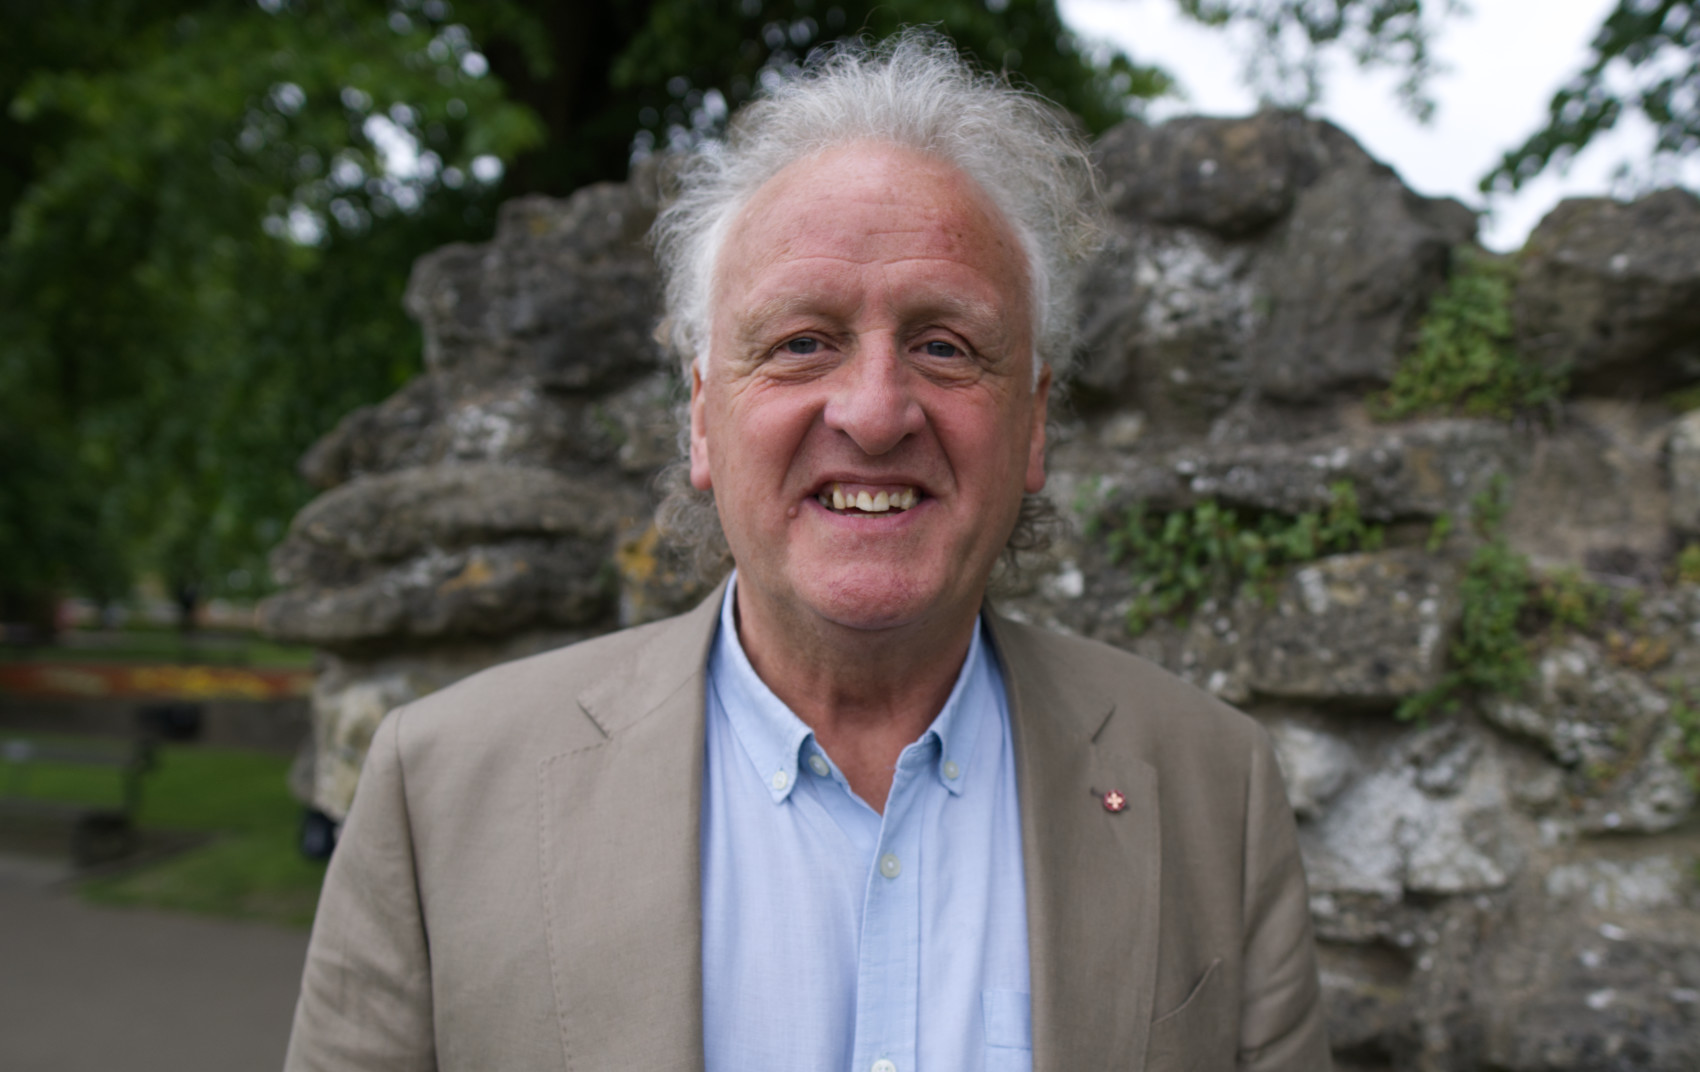 Keith Tordoff - Independent candidate for Mayor of Harrogate